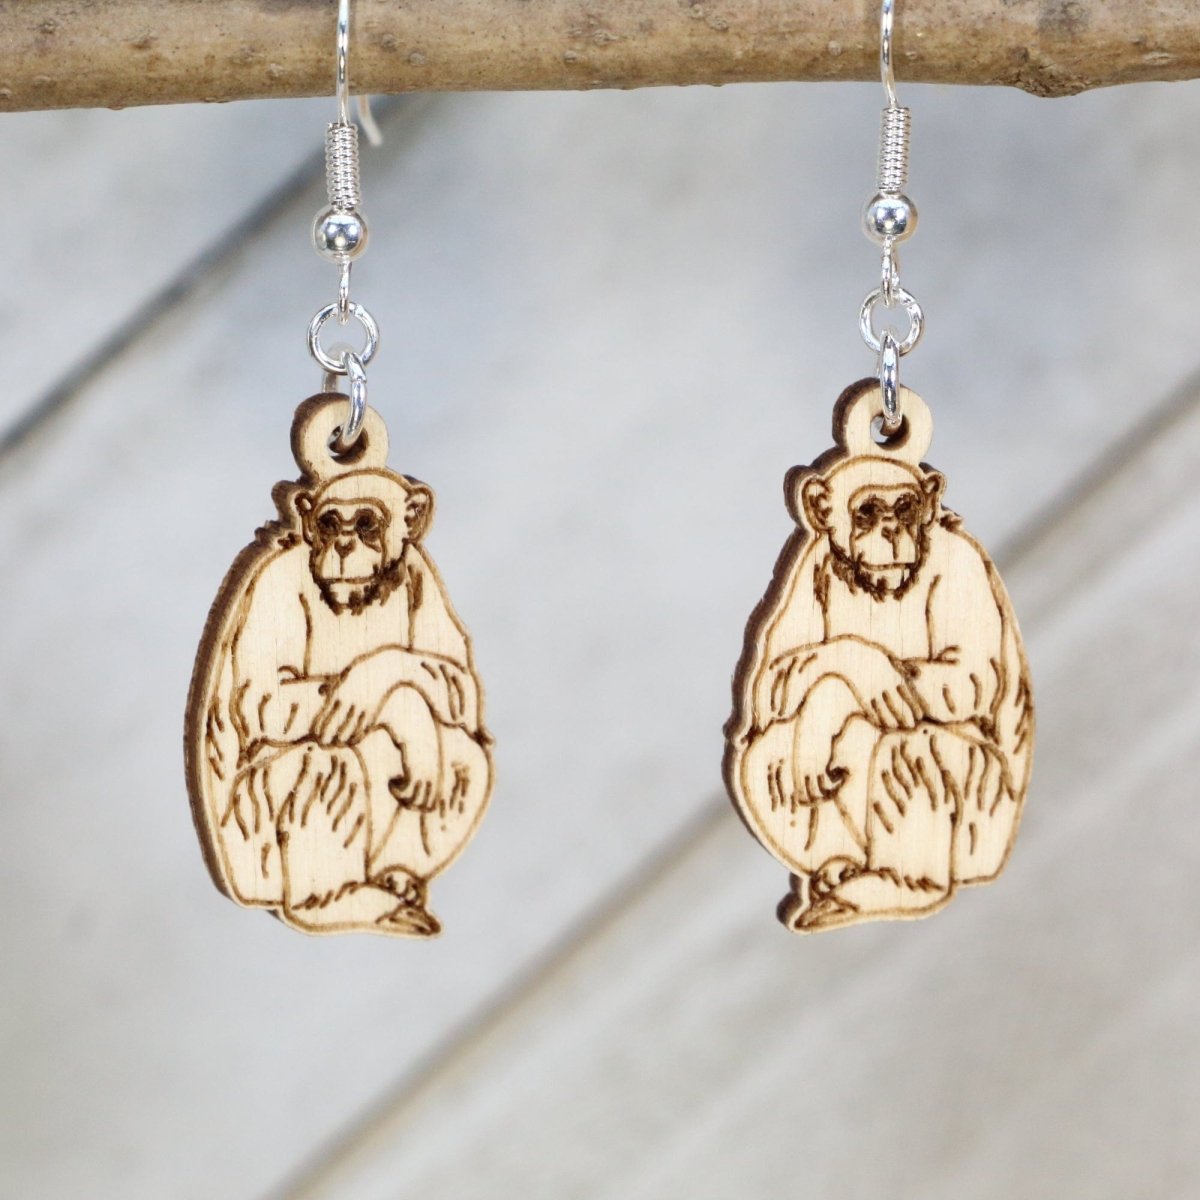 Curious Chimpanzee Wooden Earrings - - Cate's Concepts, LLC